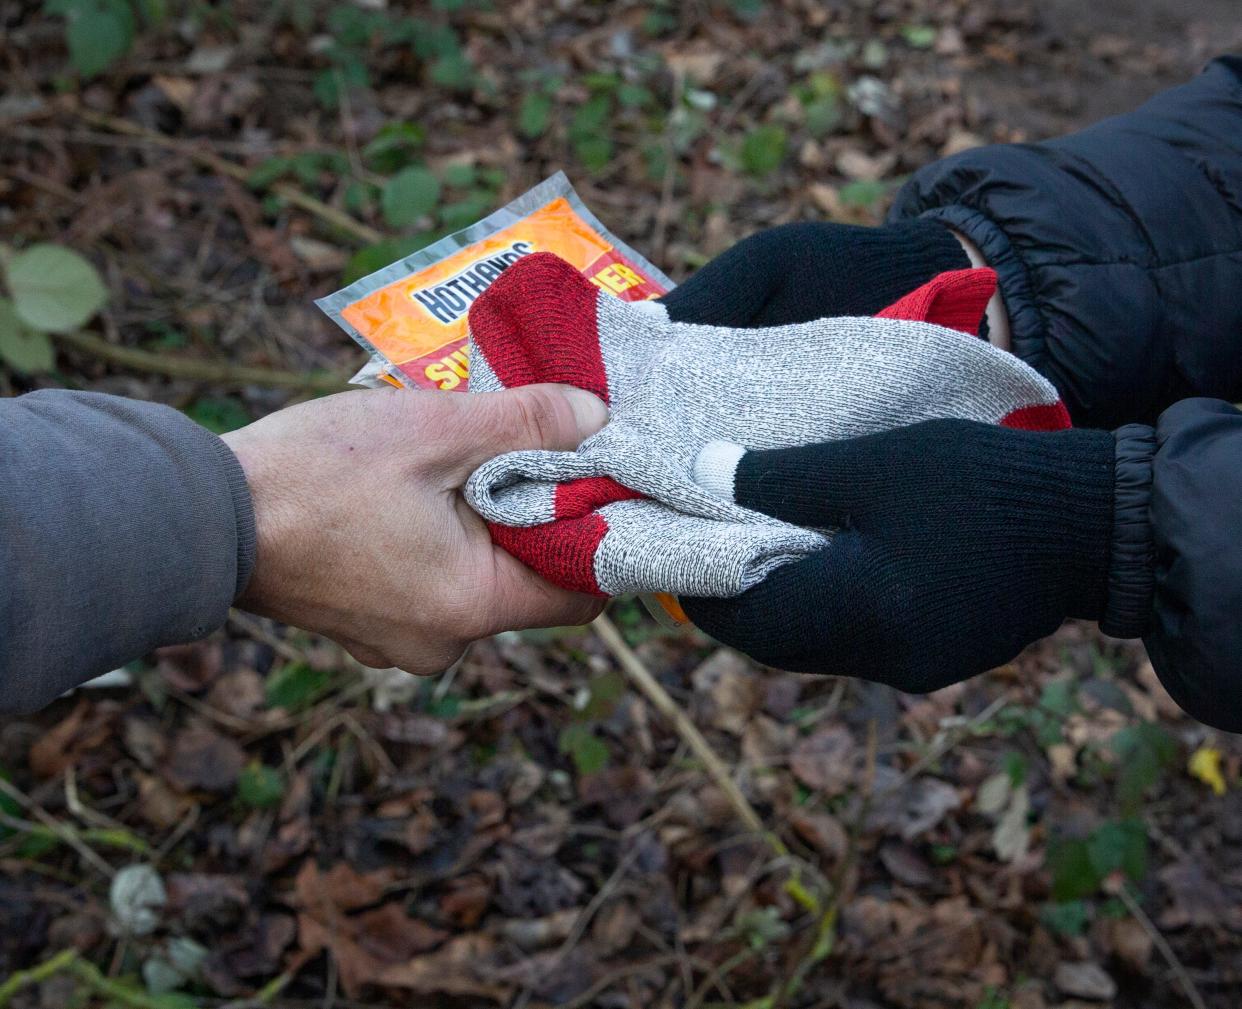 Lane County Outreach worker Theresa Burchell hands socks and hand warmer packets to a camper near the Mckenzie River last month during the Point In Time count of homeless people. Springfield city councilors are in discussions about changes to ordinances about sleeping on public property to comply with federal court rulings and a new state law.